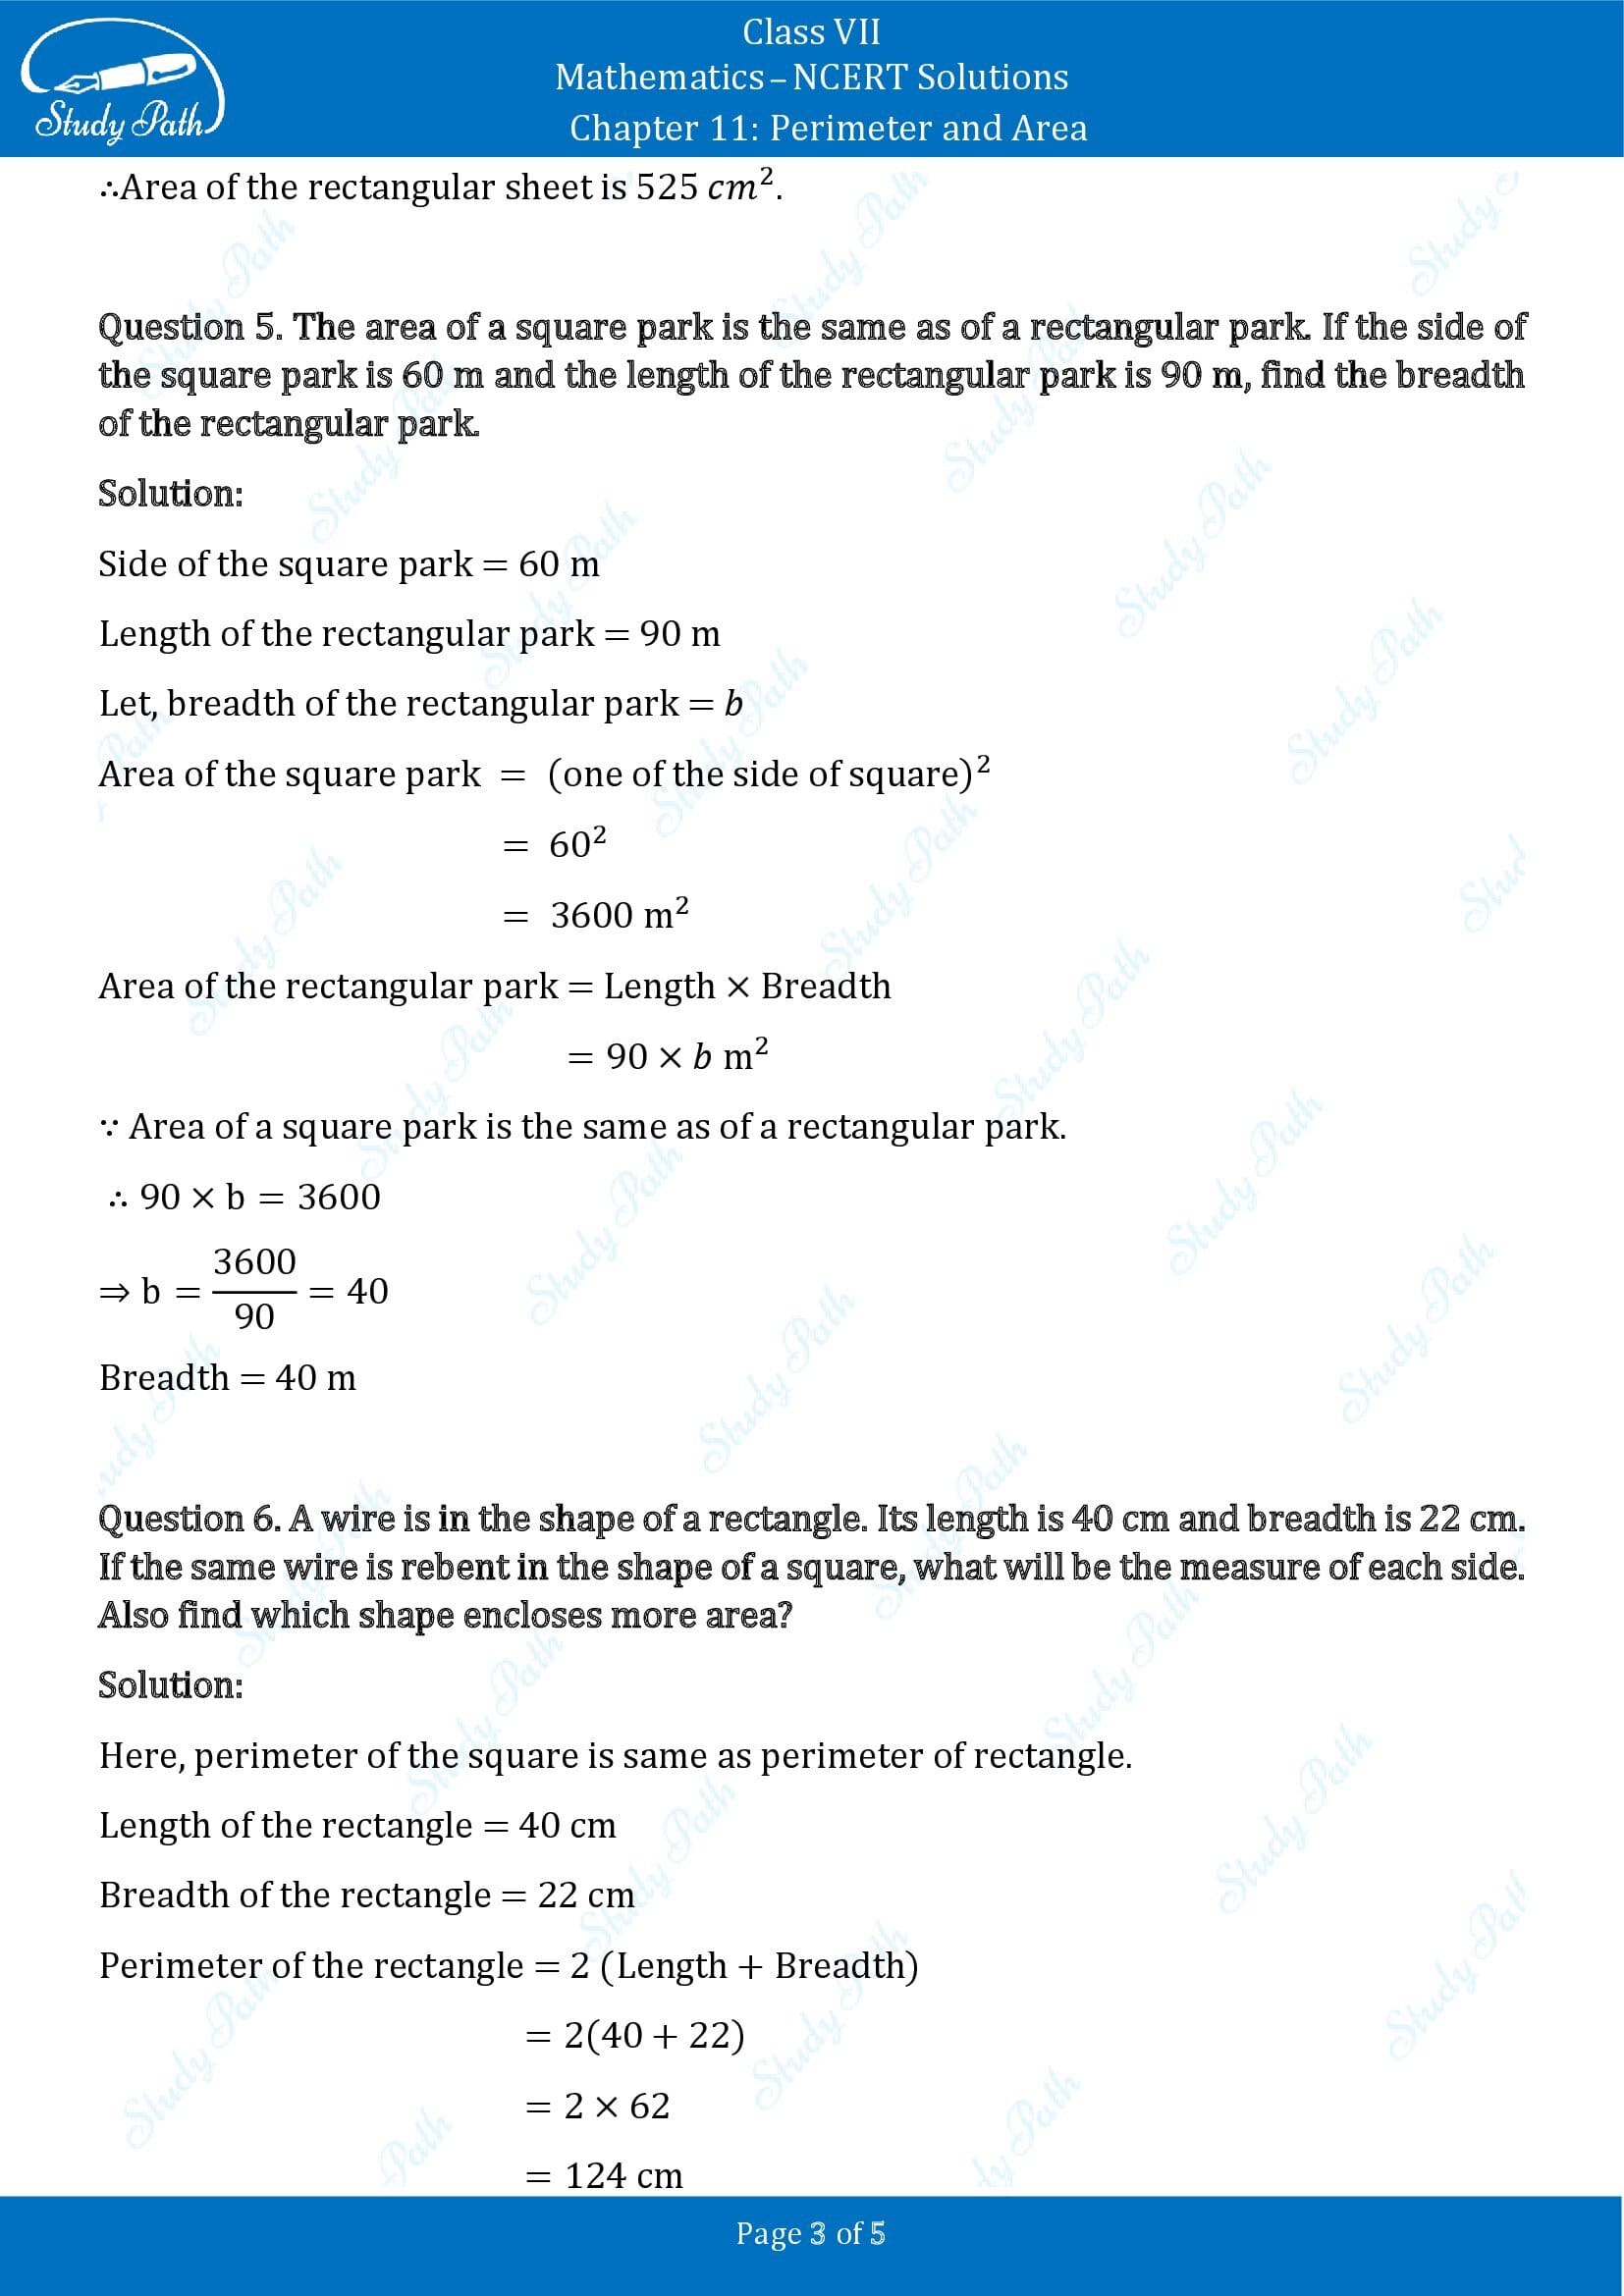 NCERT Solutions for Class 7 Maths Chapter 11 Perimeter and Area Exercise 11.1 00003